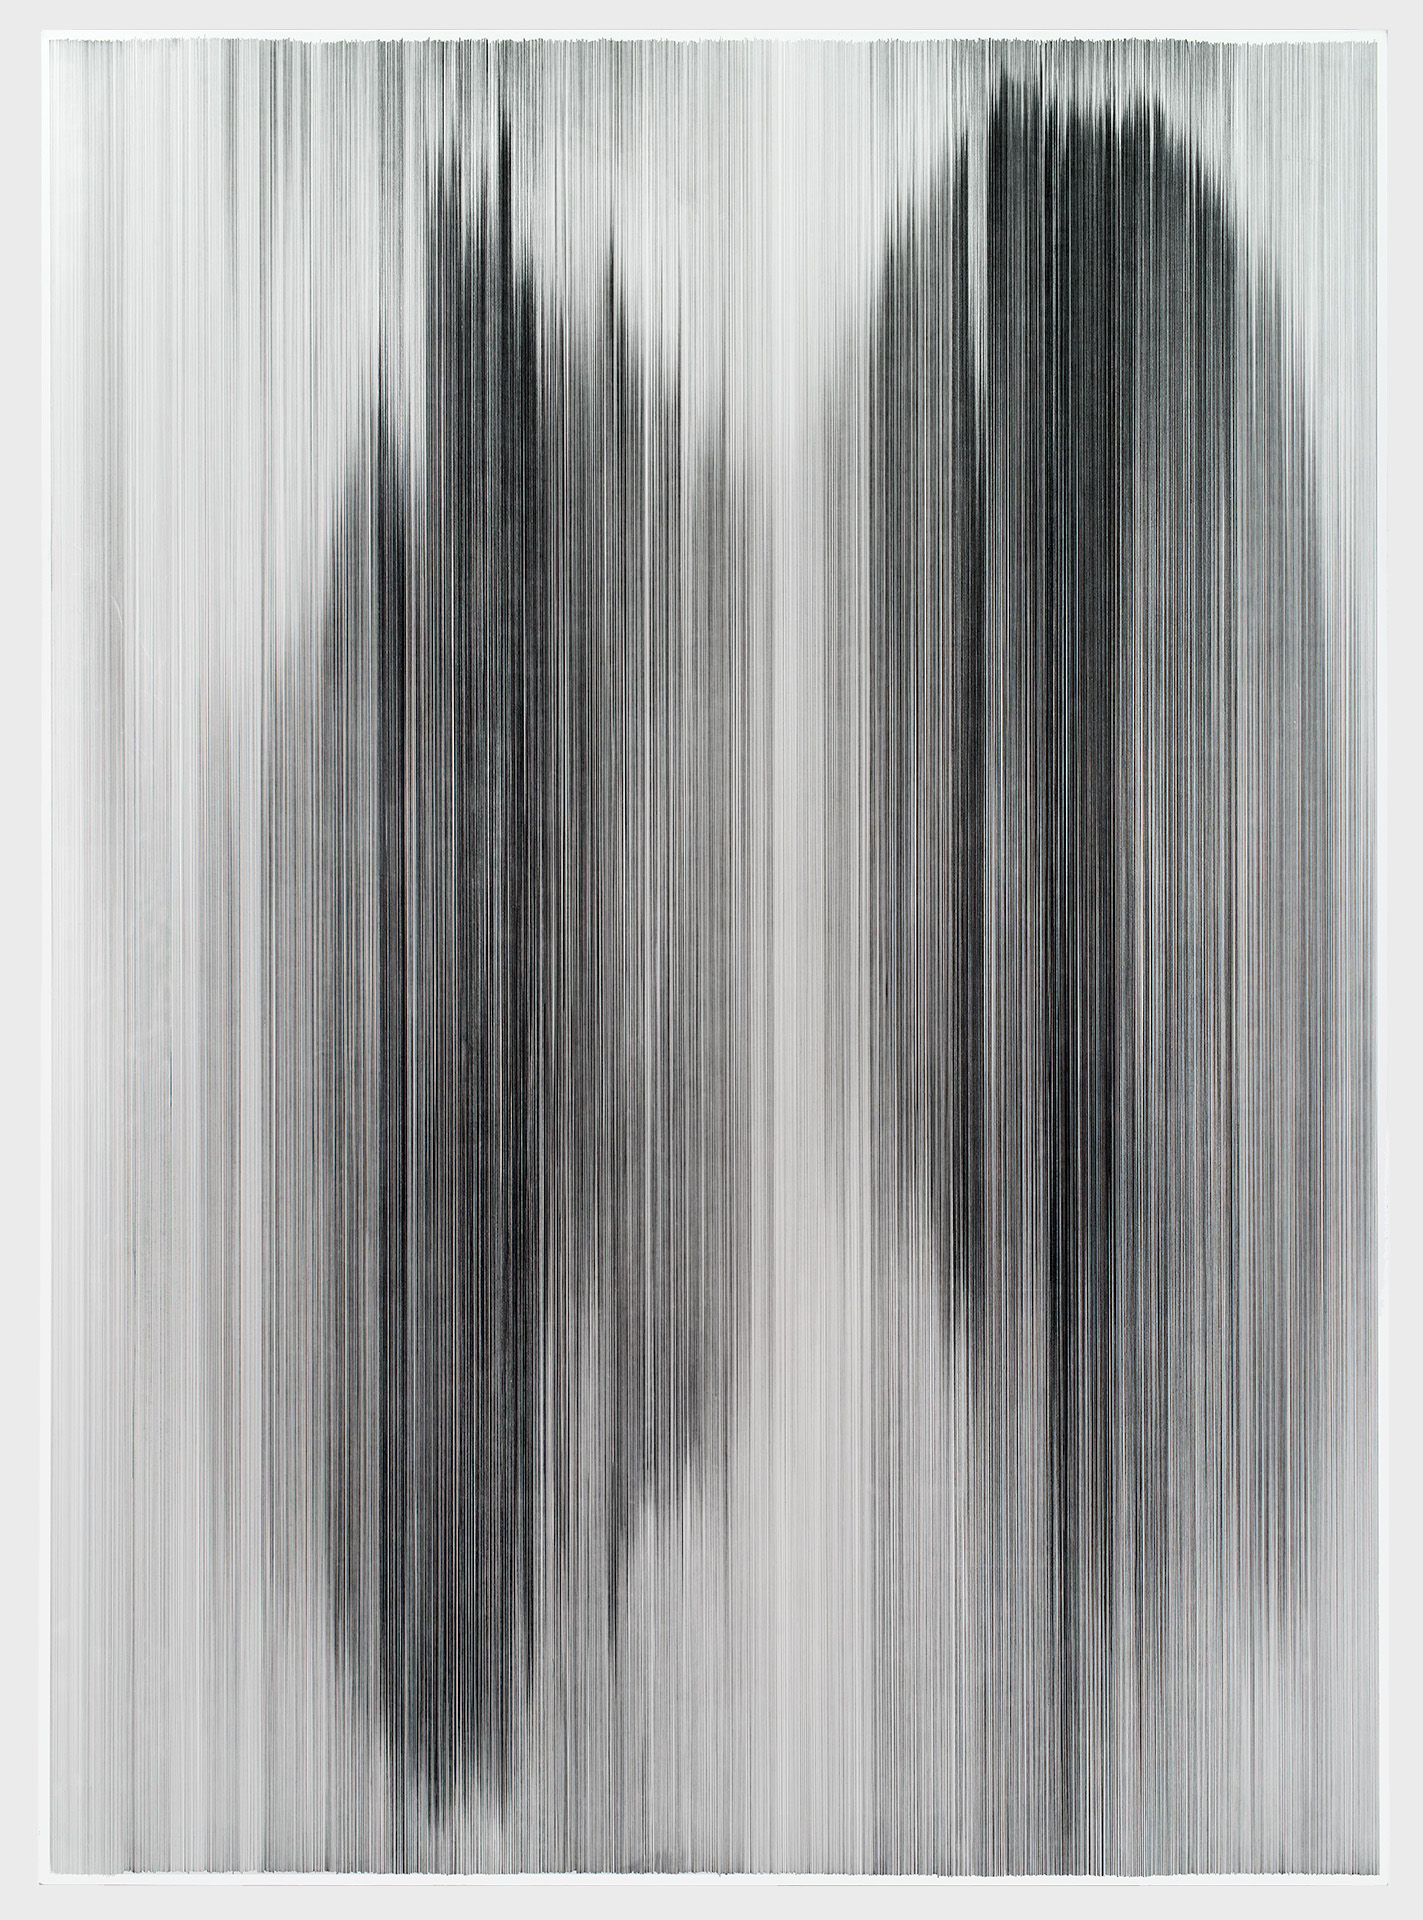    parallel 38   2013 graphite on cotton mat board 84 x 60 inches The Rachofsky Collection, Dallas, Texas 